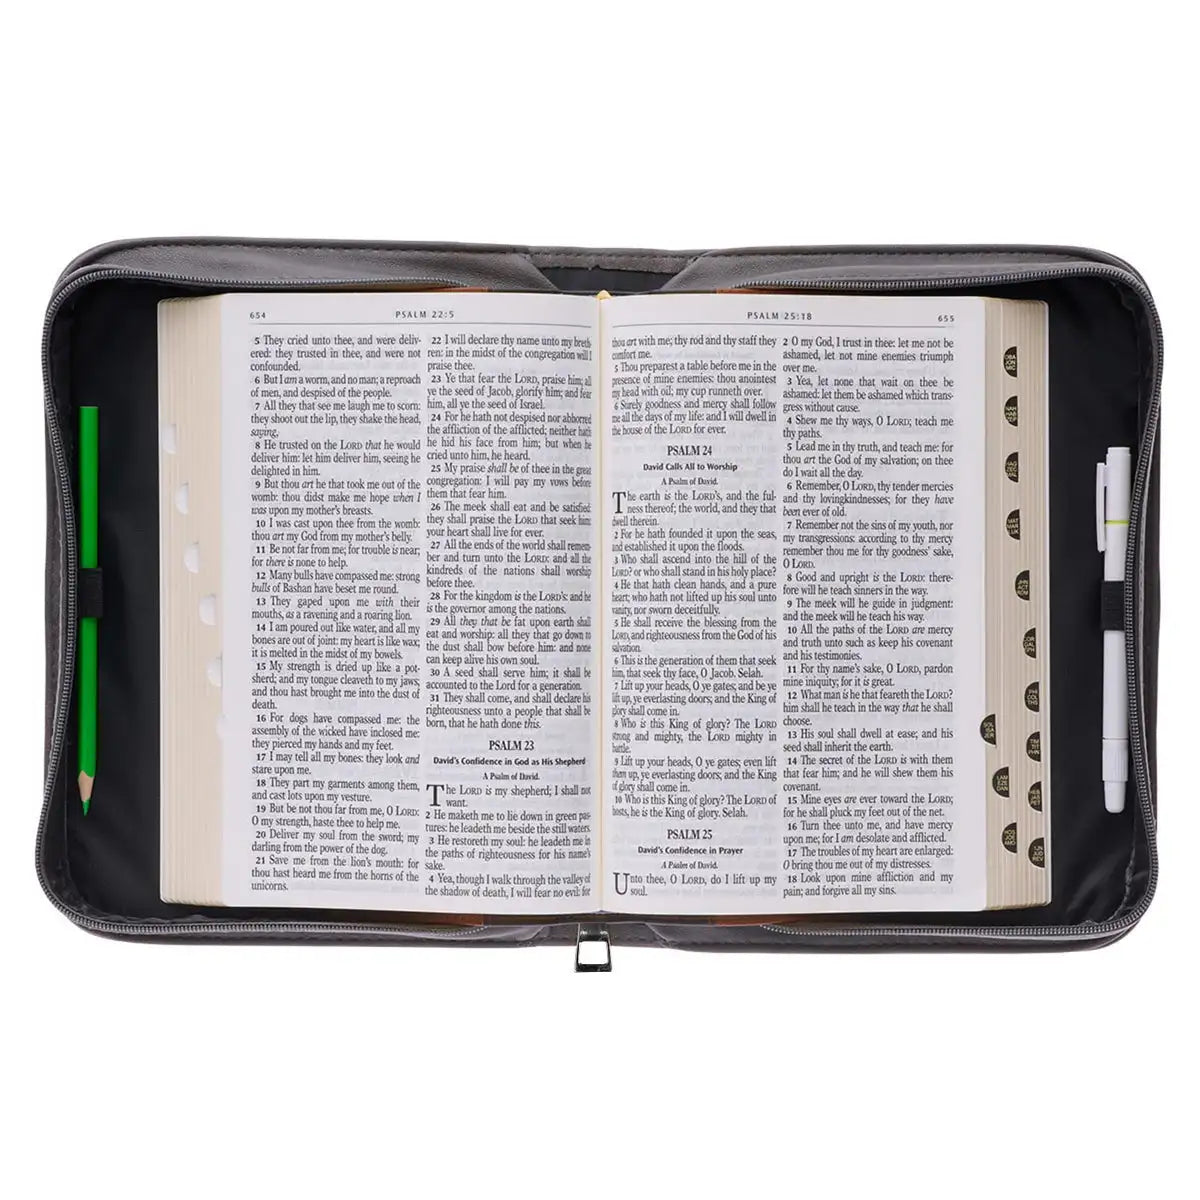 I Can Do All Things Personalized PU Leather Christian Bible Book Cover